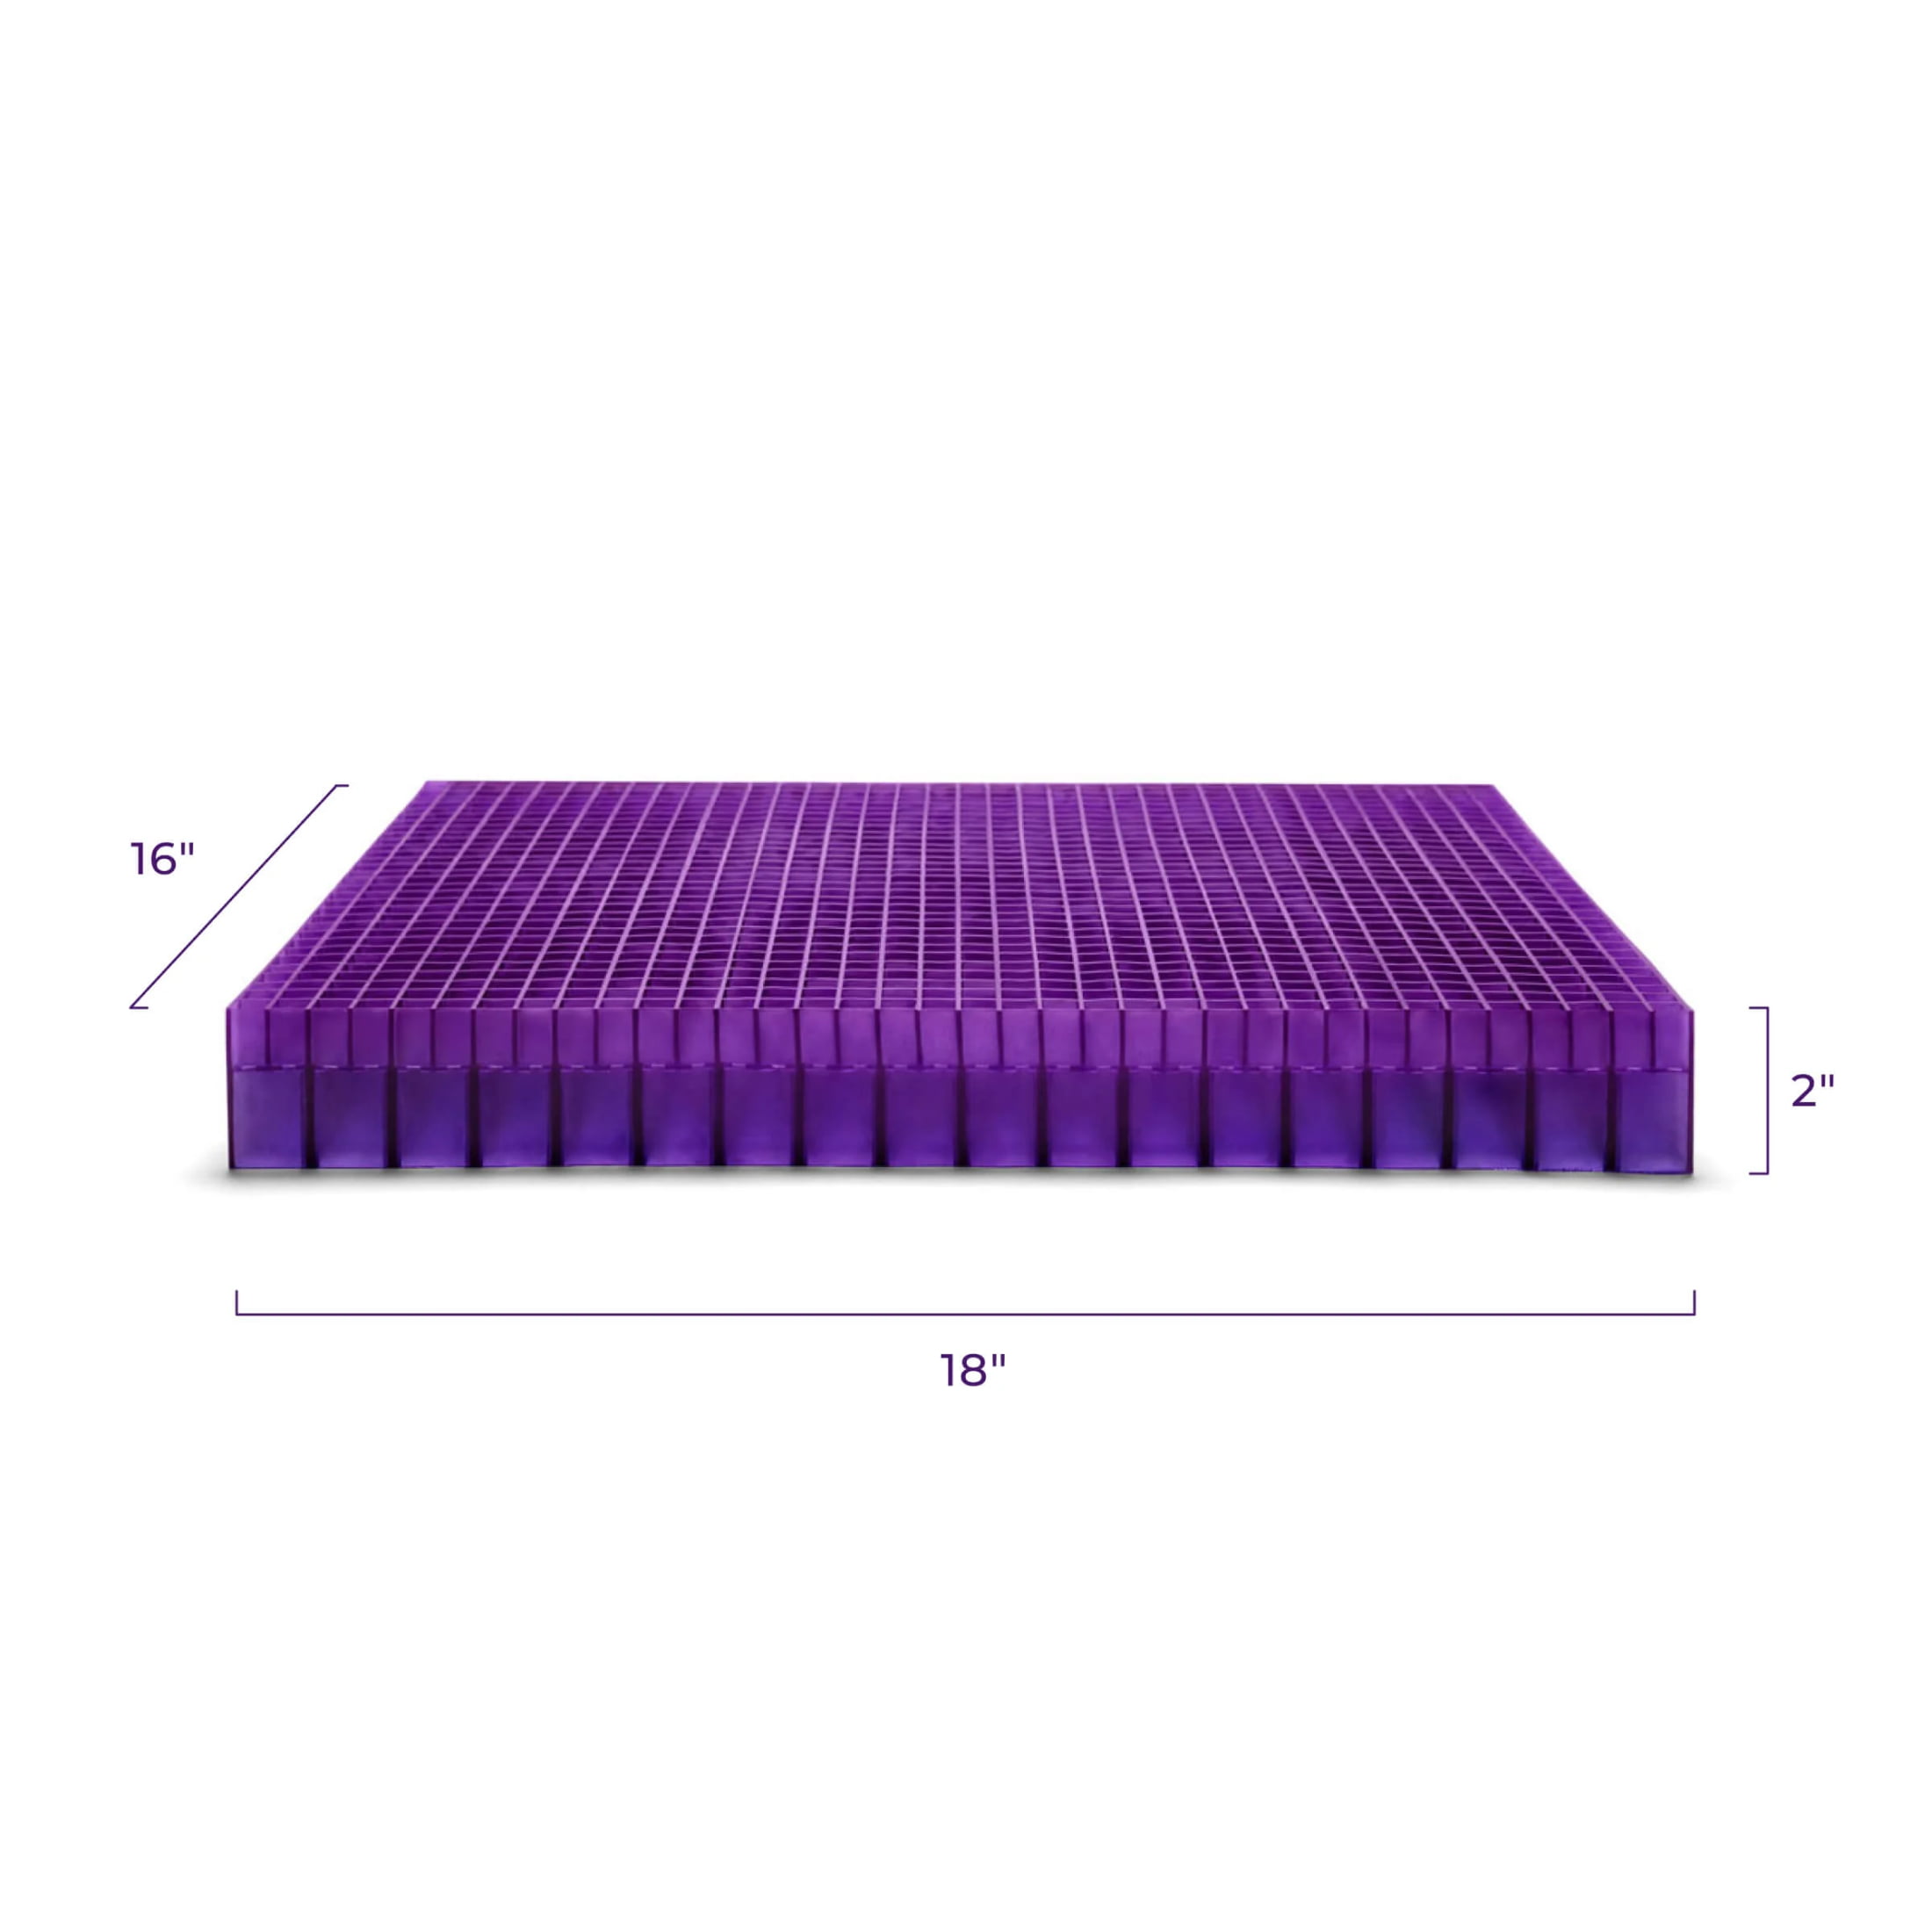  Purple Back Cushion, Pressure Reducing Grid Designed for  Ultimate Comfort, Designed for Chairs, Gaming, and Travel